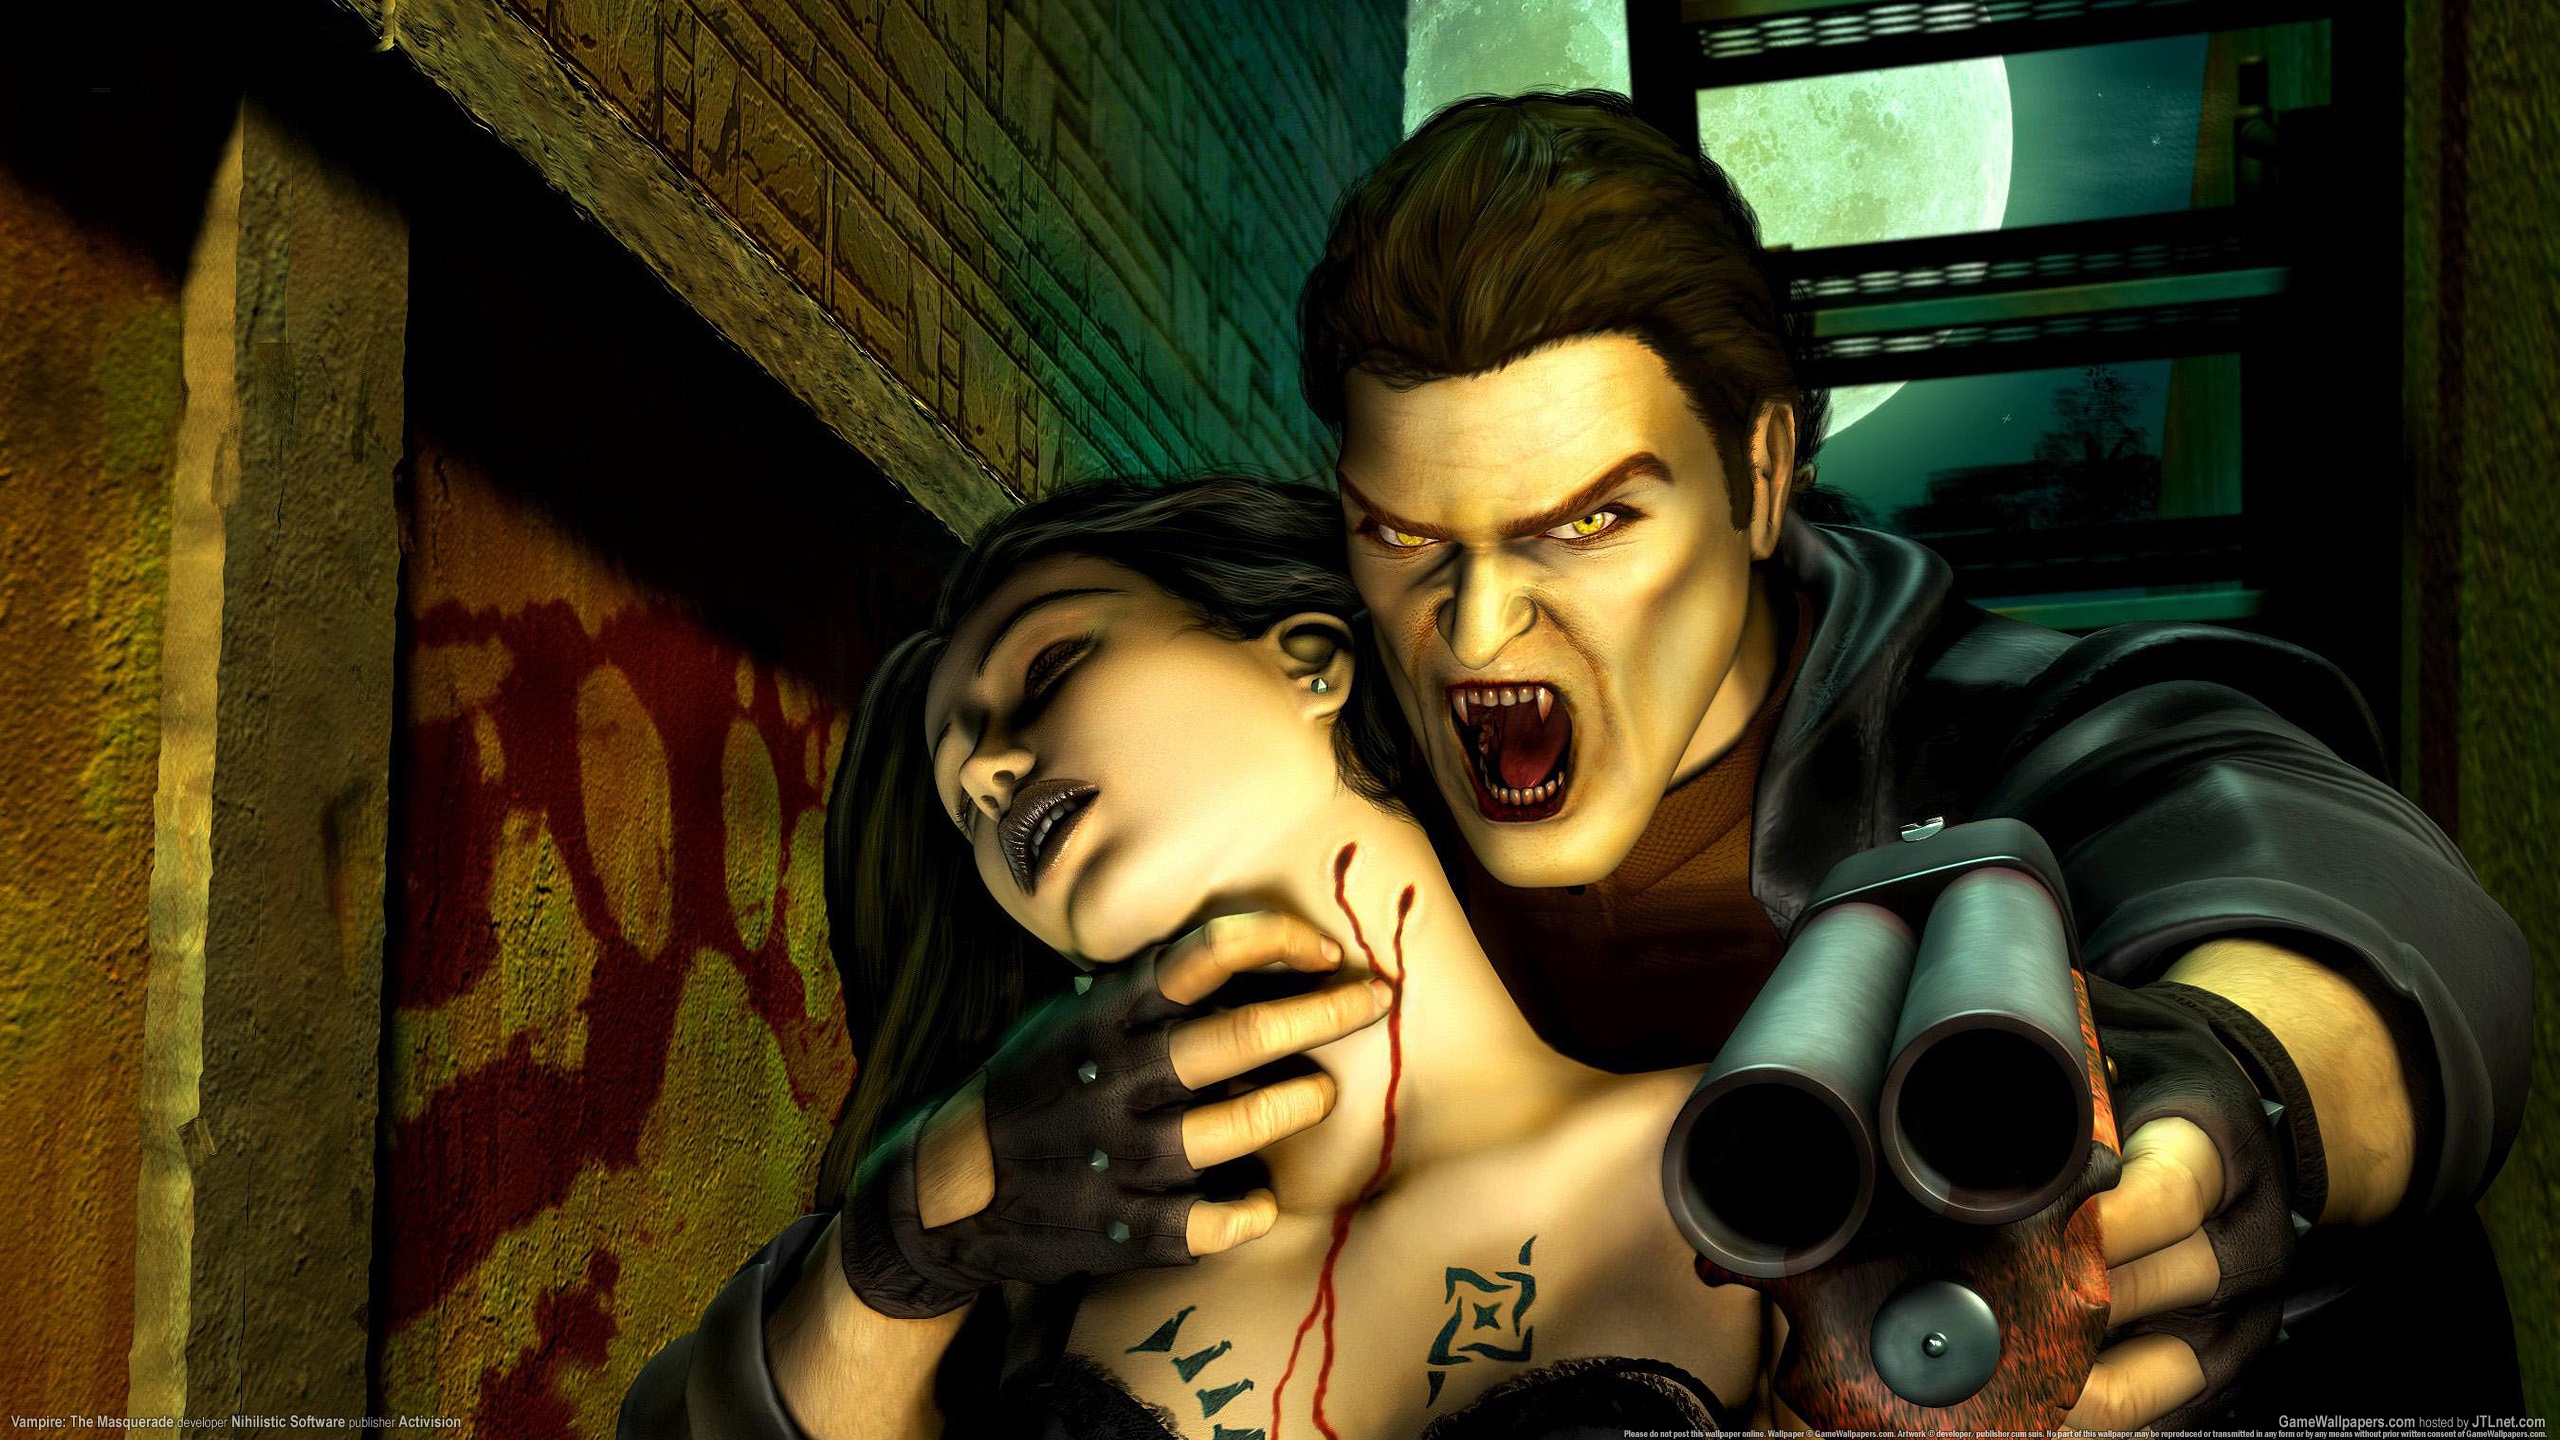 Vampire: The Masquerade 2560x1440 wallpaper or background 04